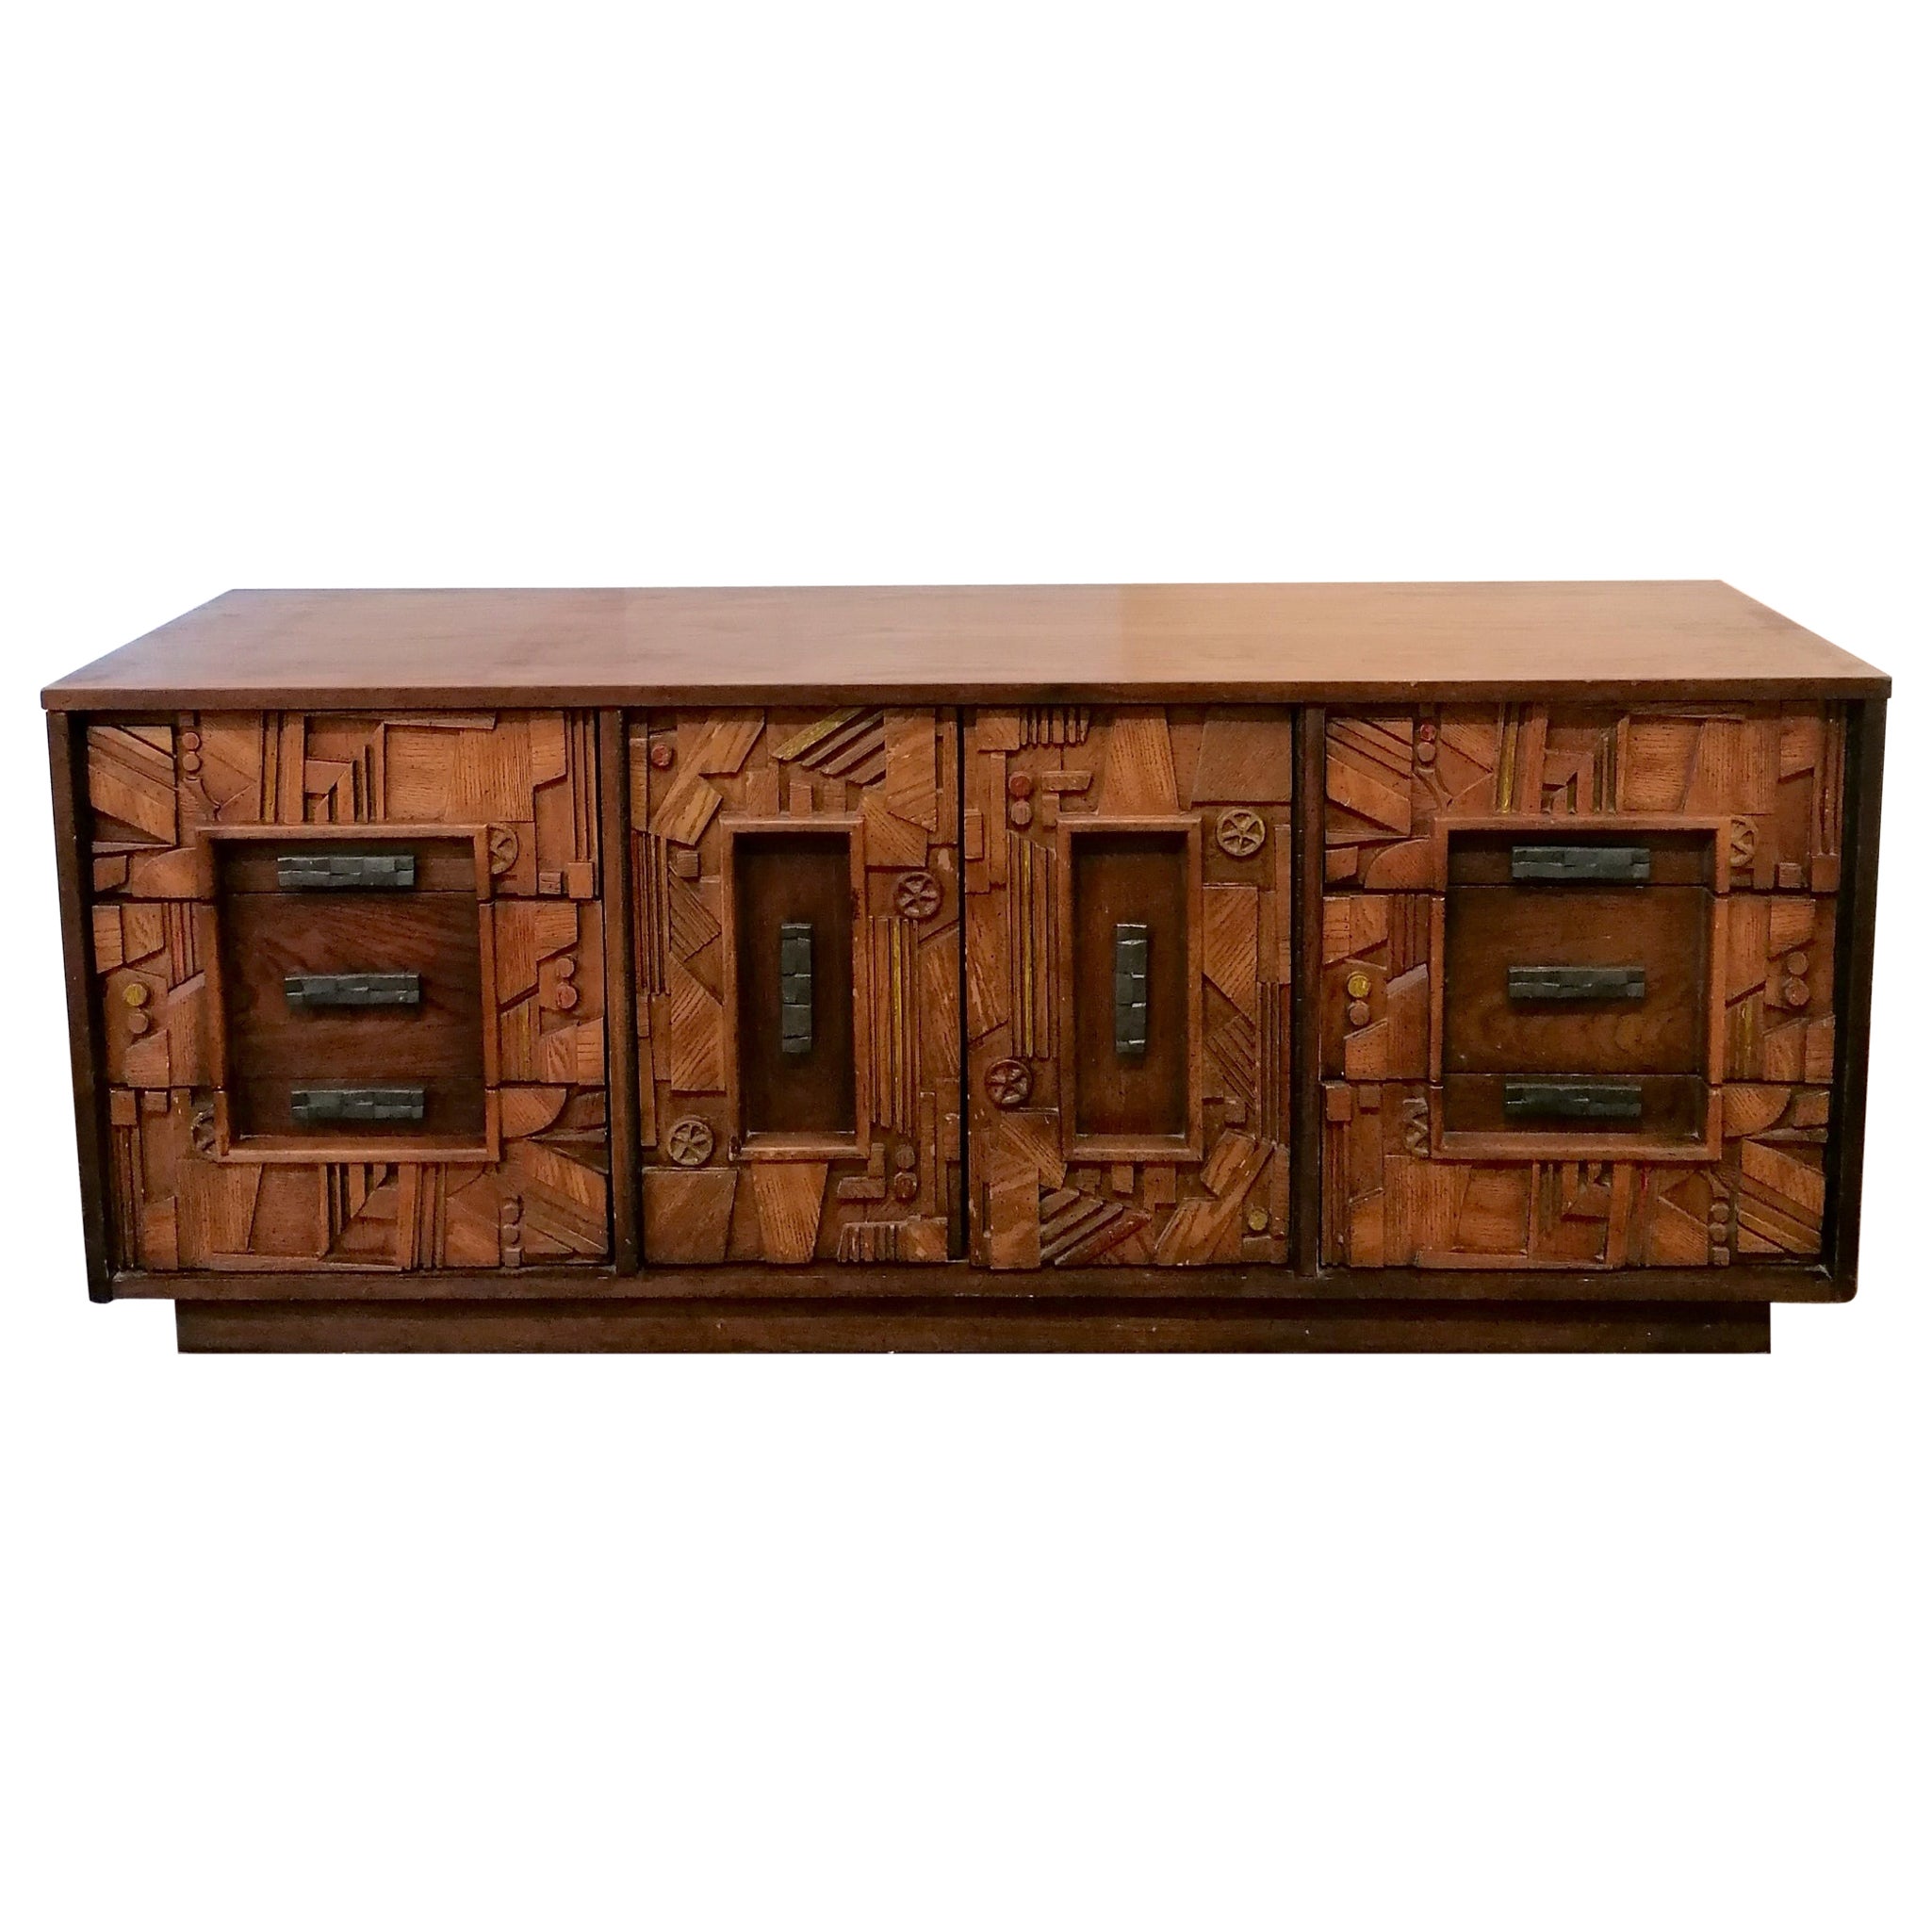 Rare 1970s American brutalist sideboard with drawers, probably by Lane Furniture For Sale